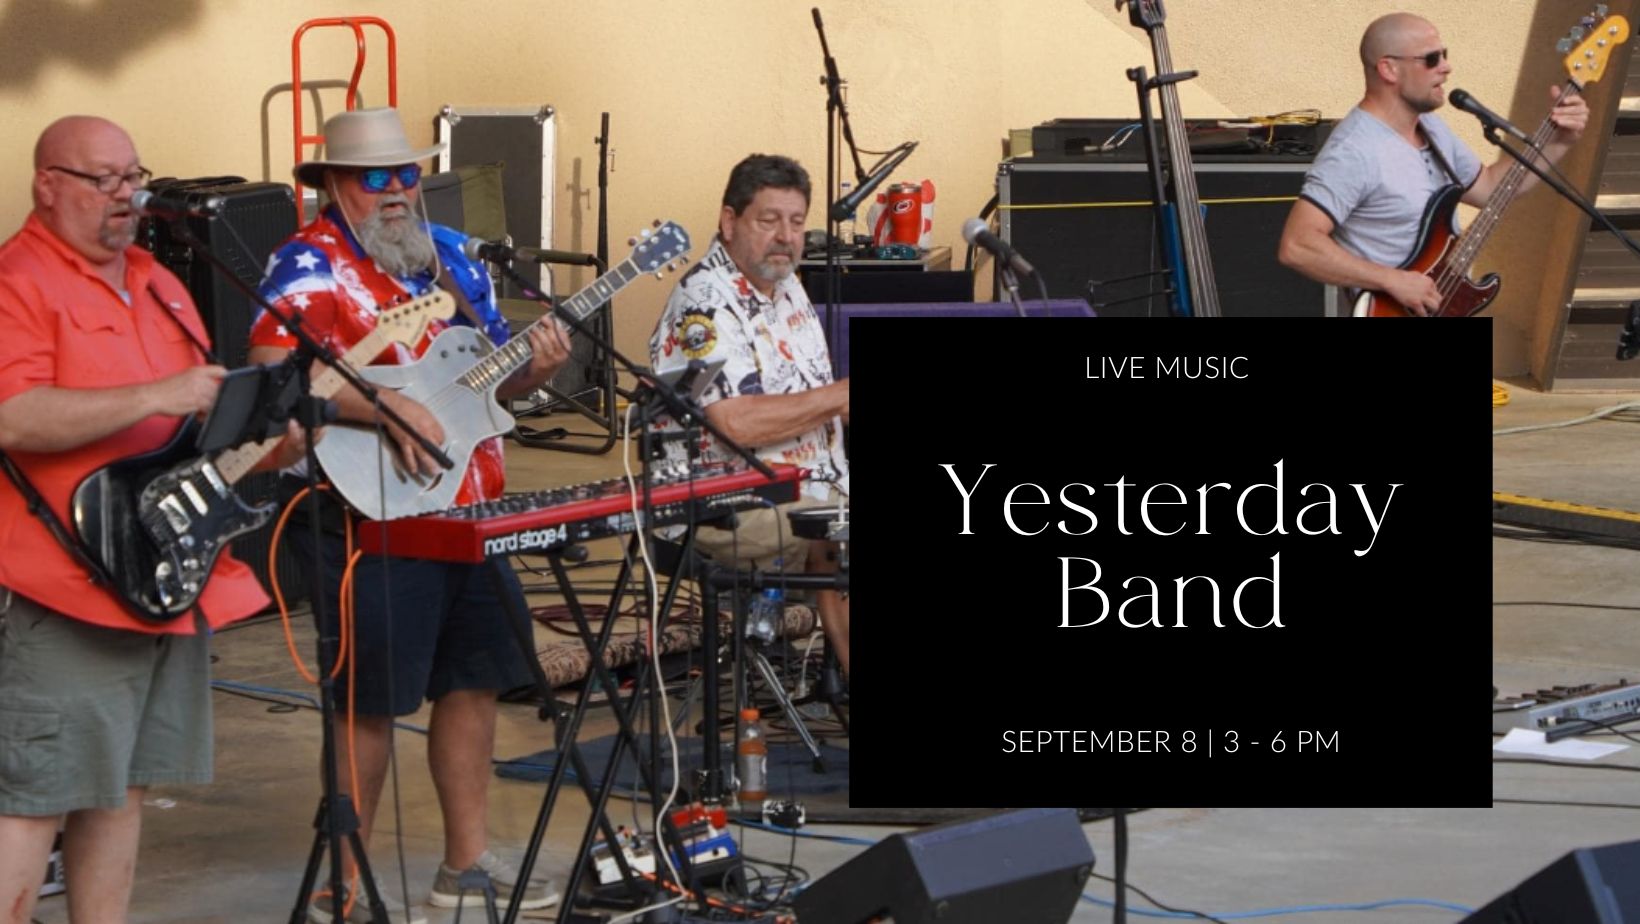 Live Music: Yesterday Band